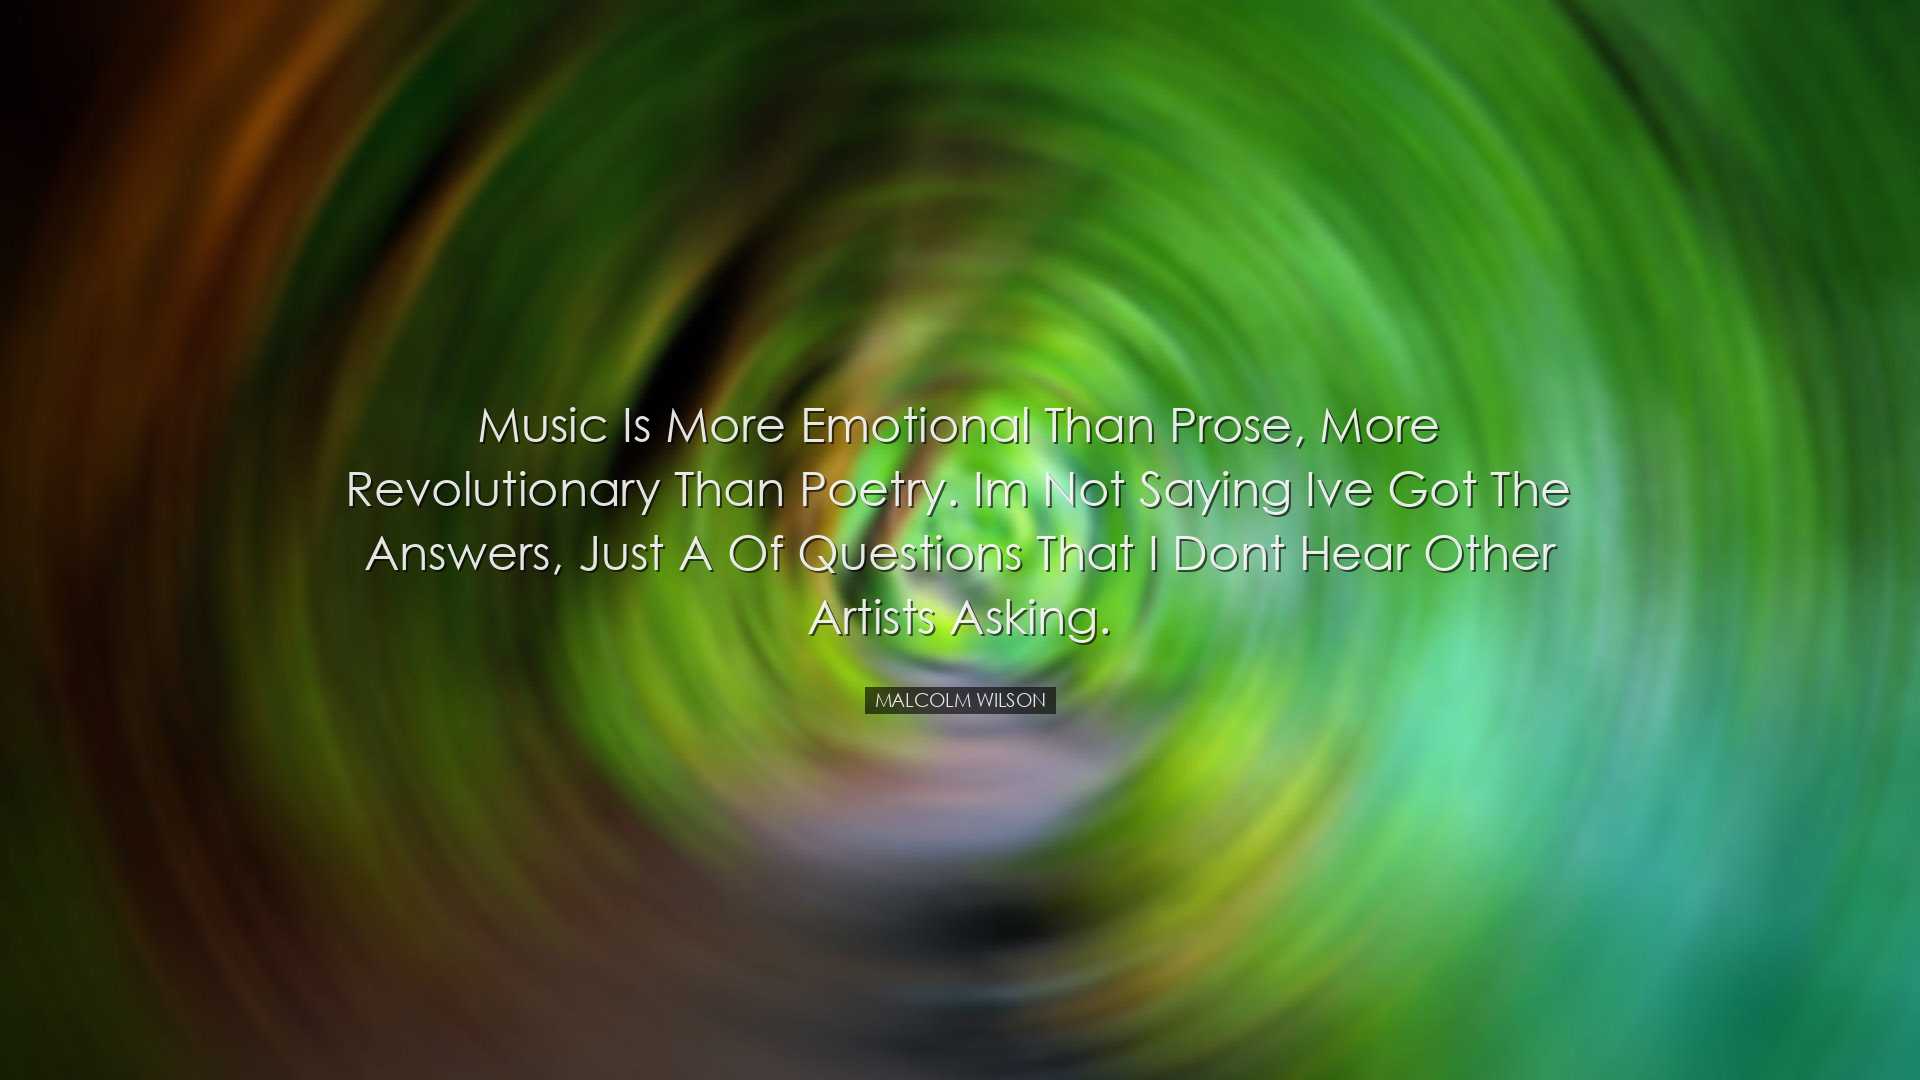 Music is more emotional than prose, more revolutionary than poetry